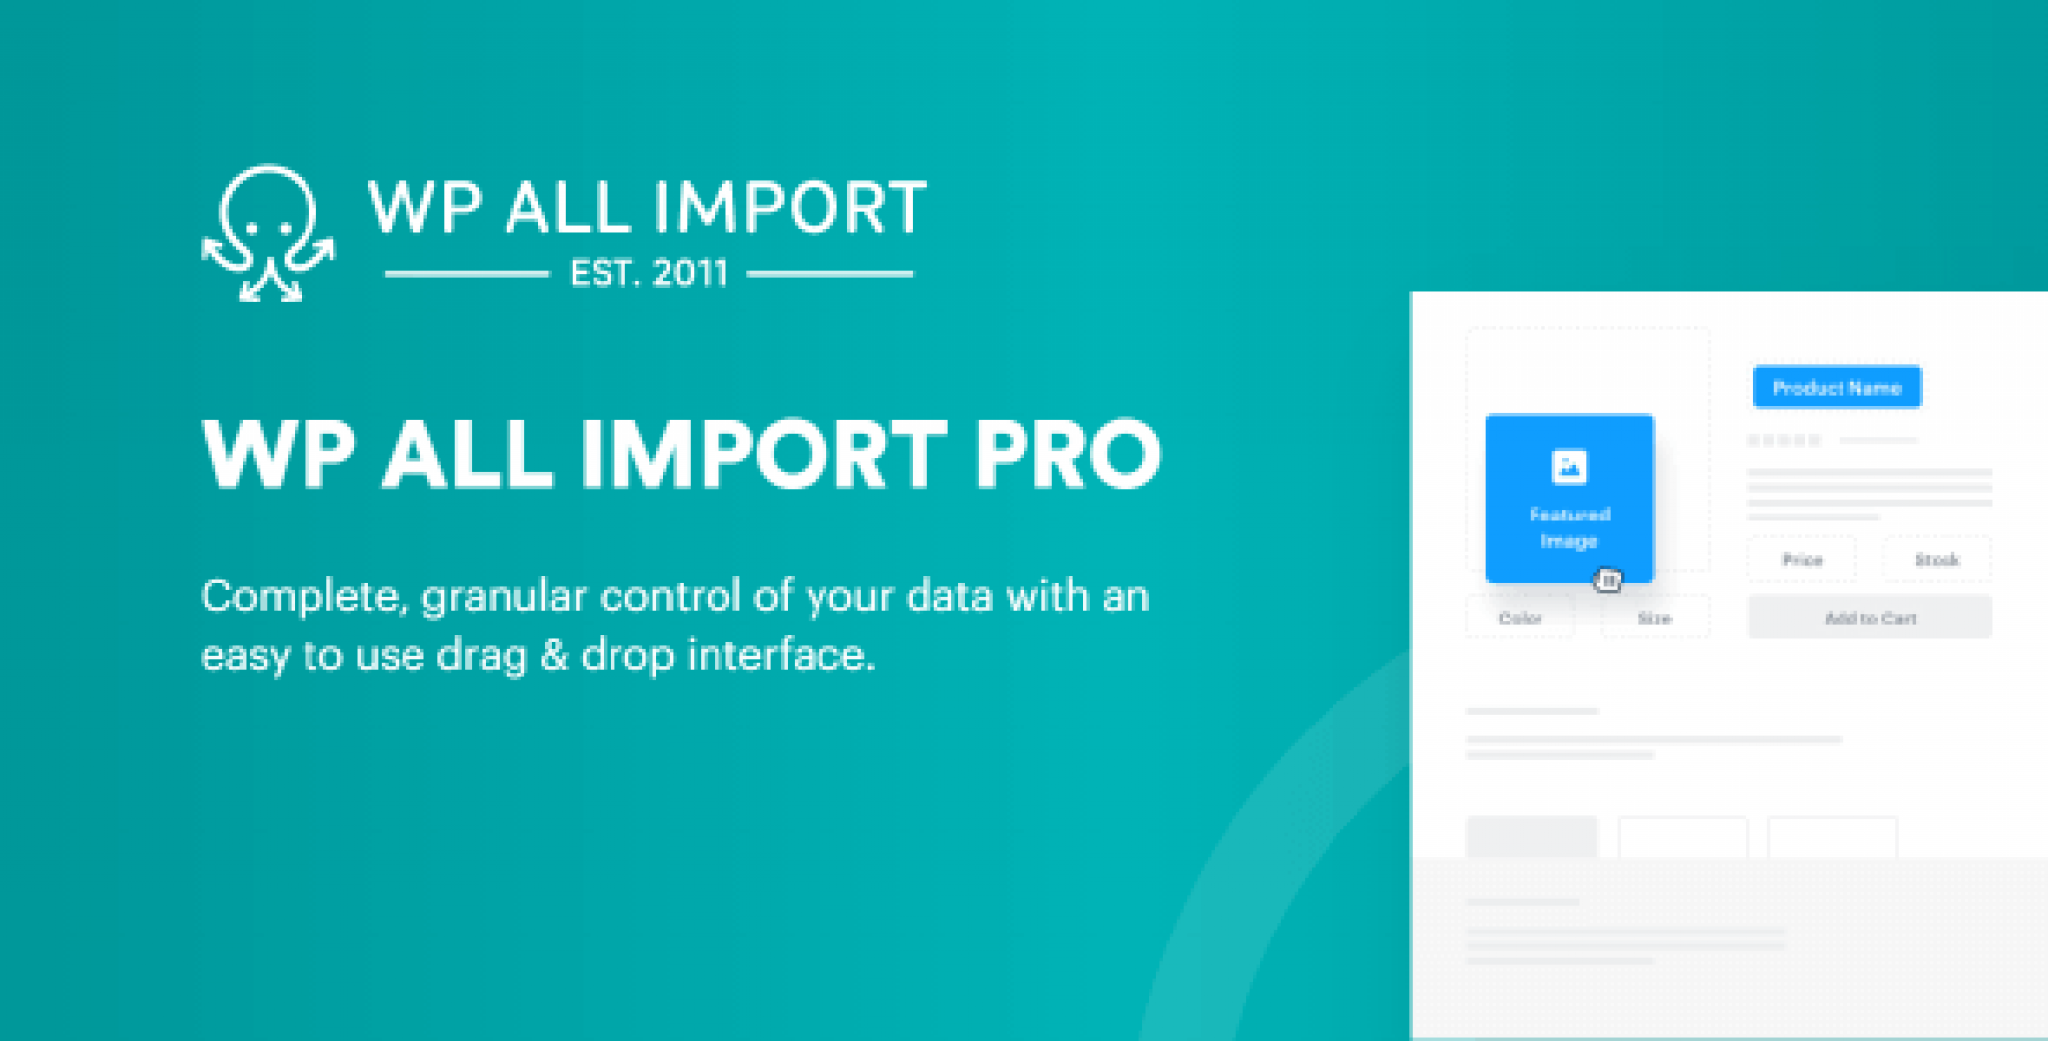 Wp all Import. Wp all Export Pro. Wp Importer. Wp all import pro